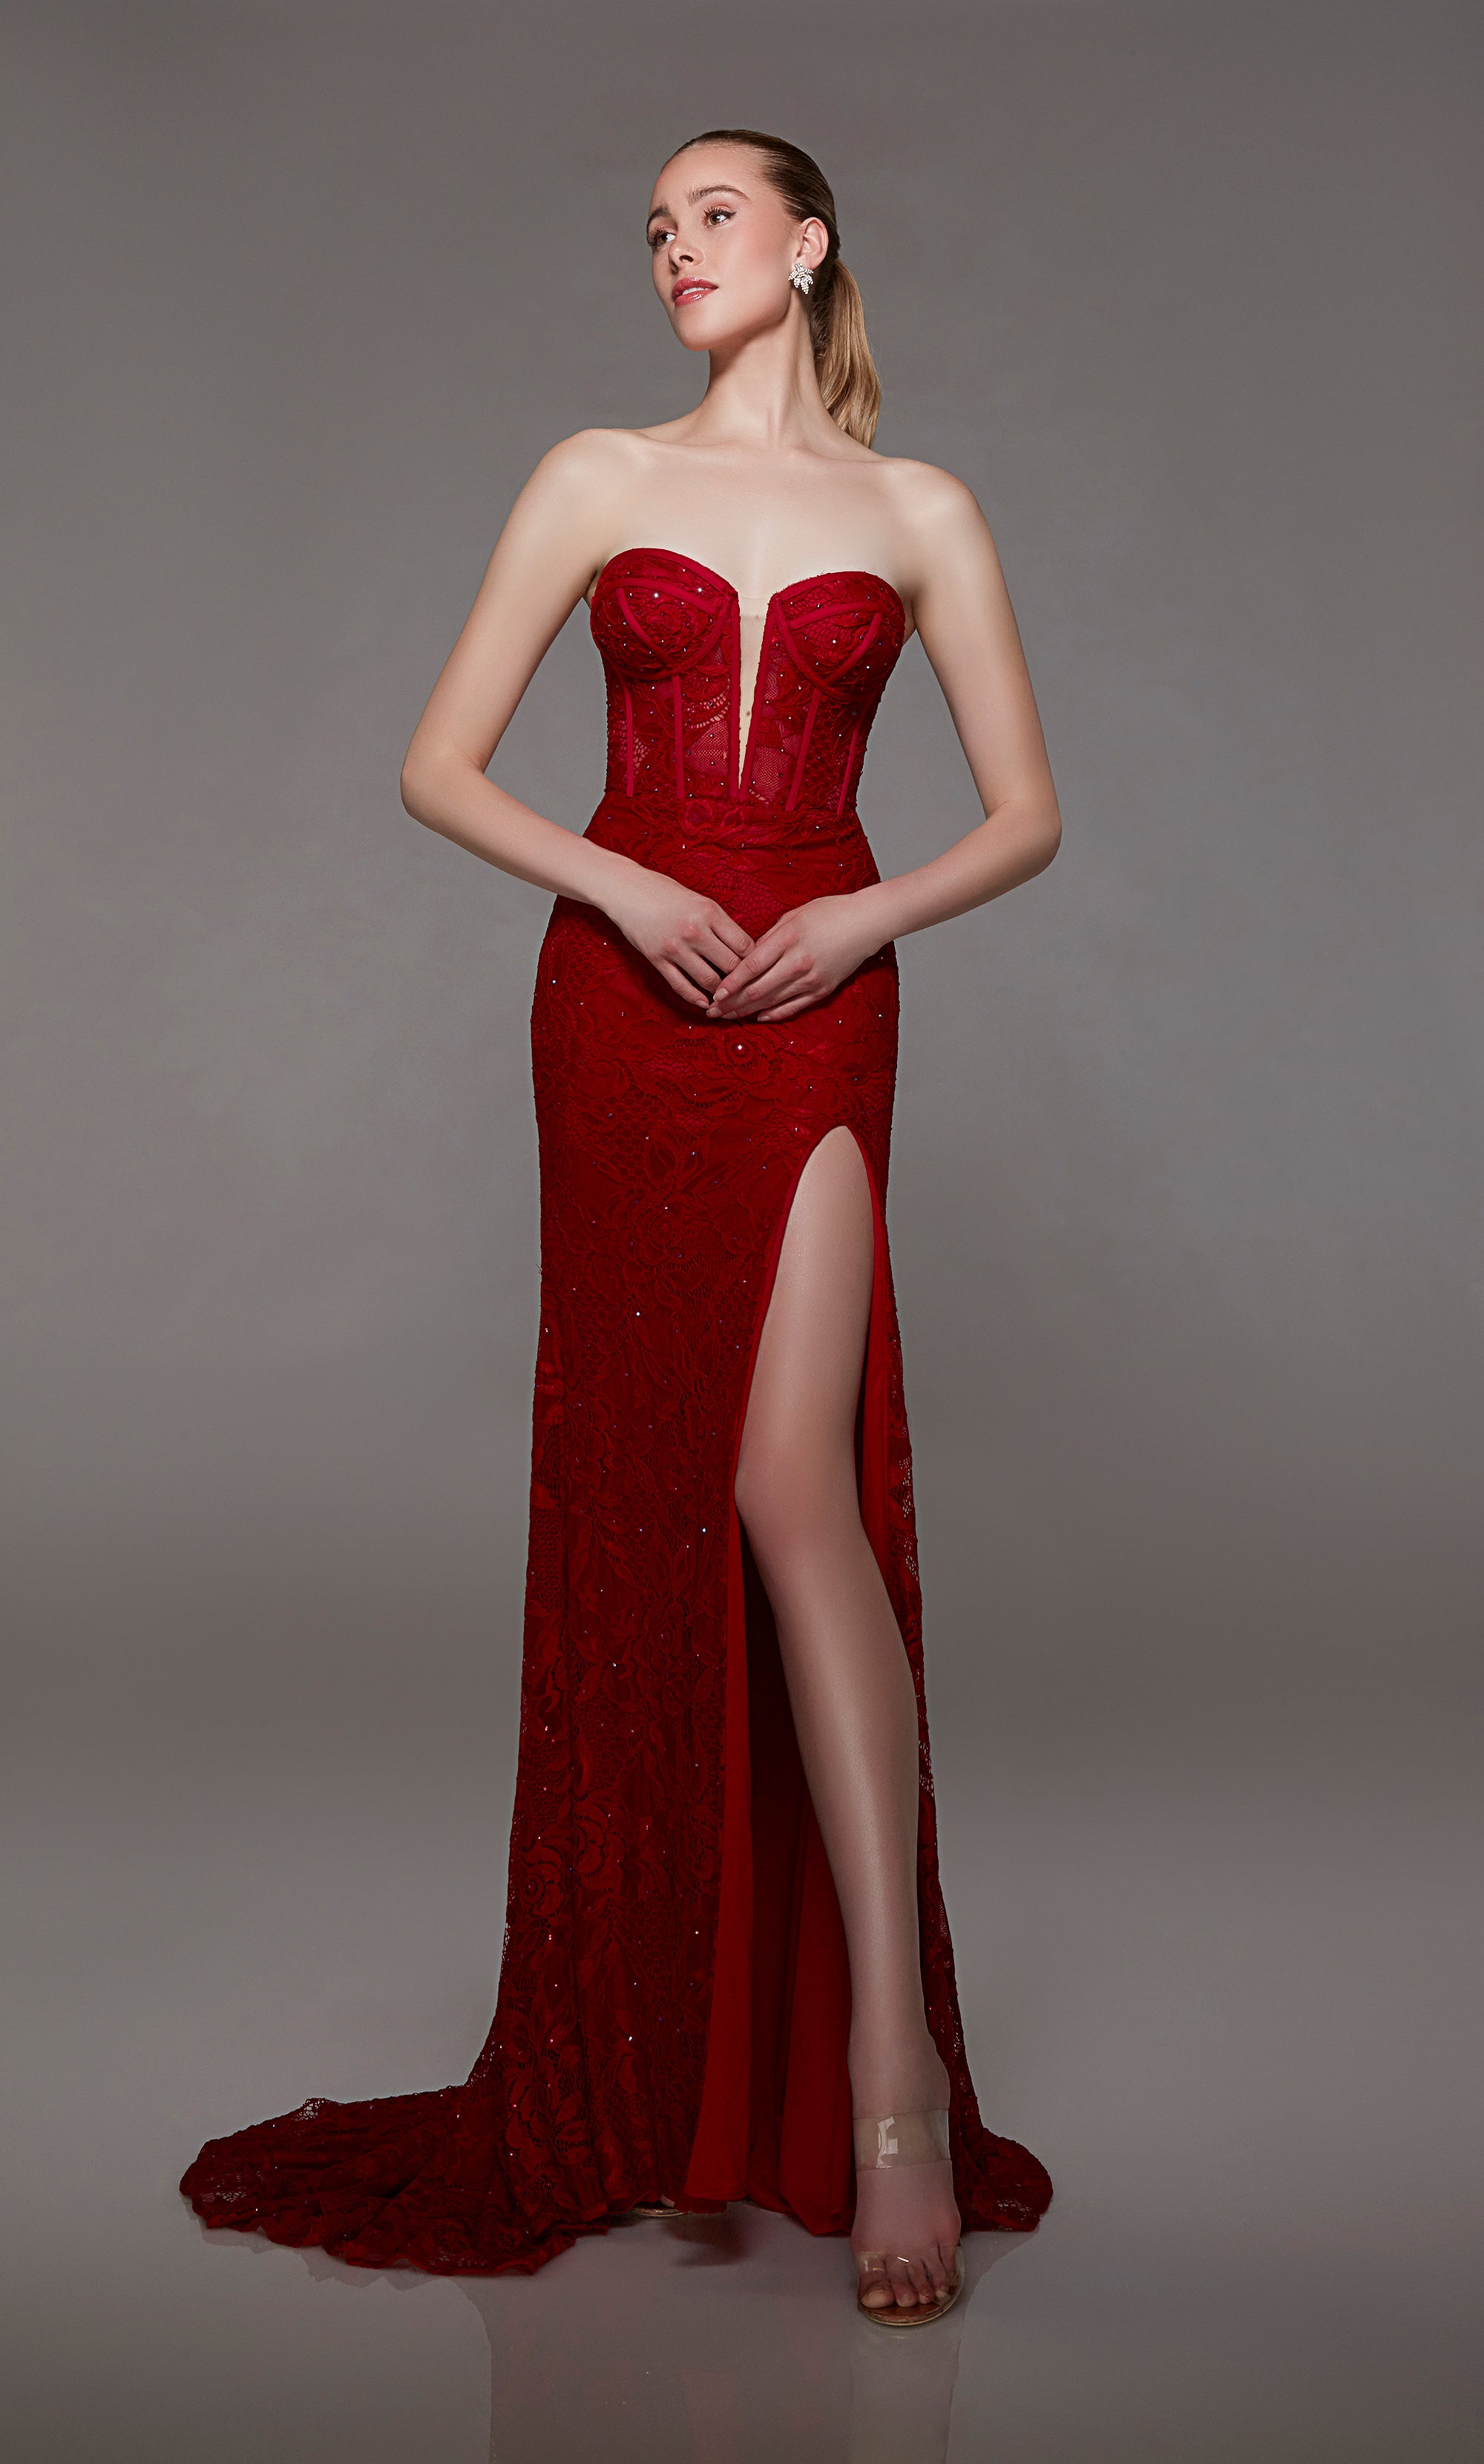 Strapless Satin Sheath Prom Dresses with Slit Lace Up Back Pageant